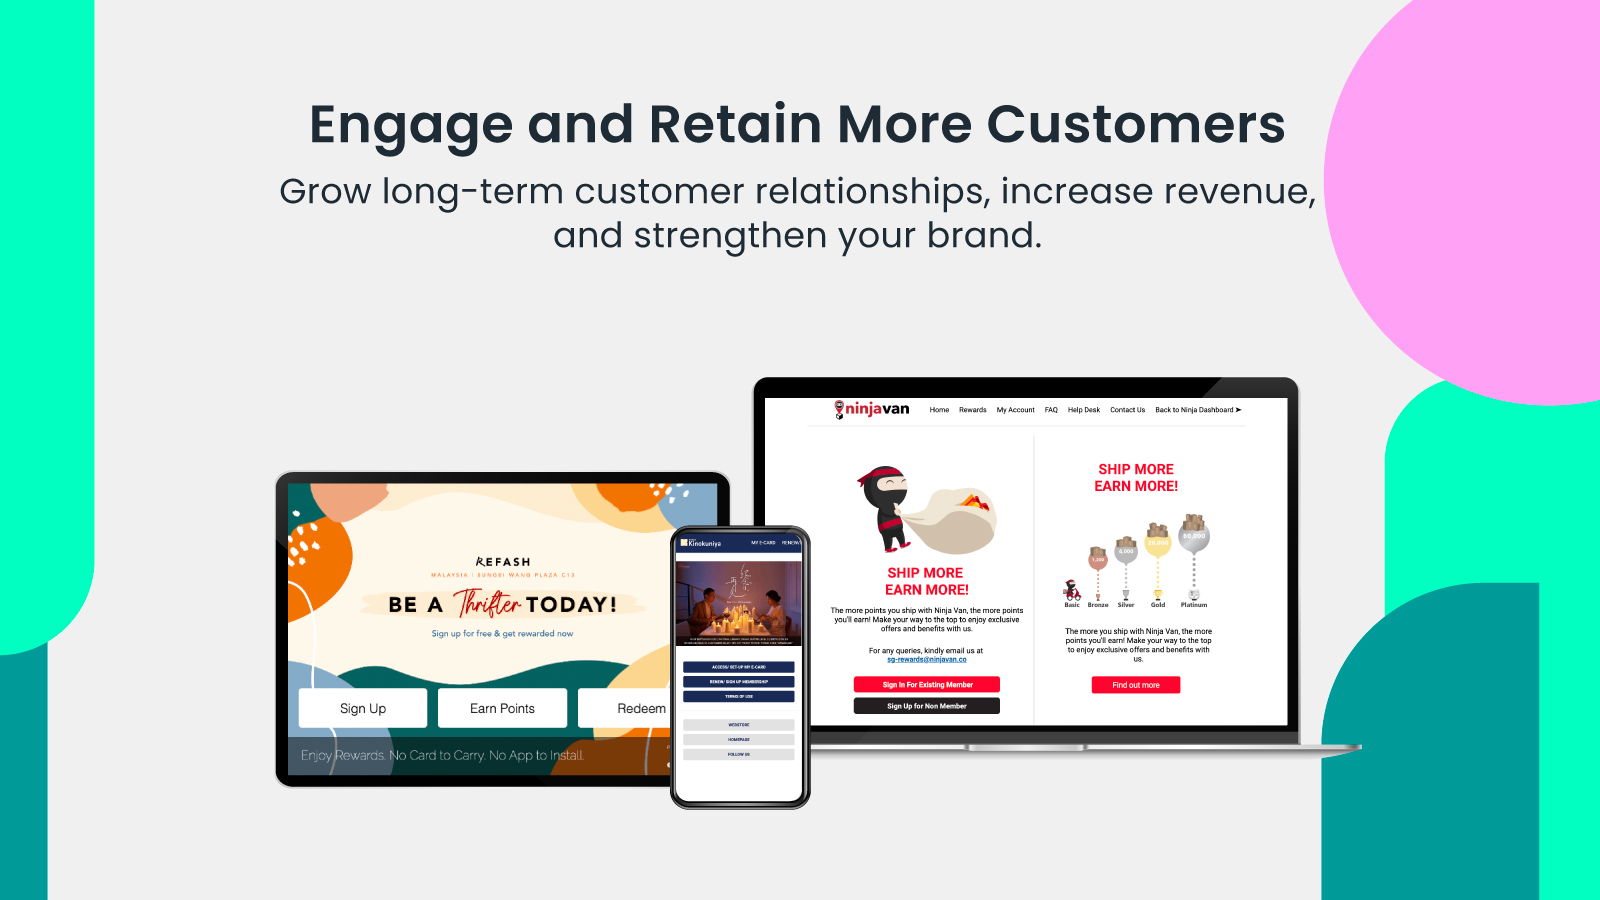 Engage and Retain More Customers